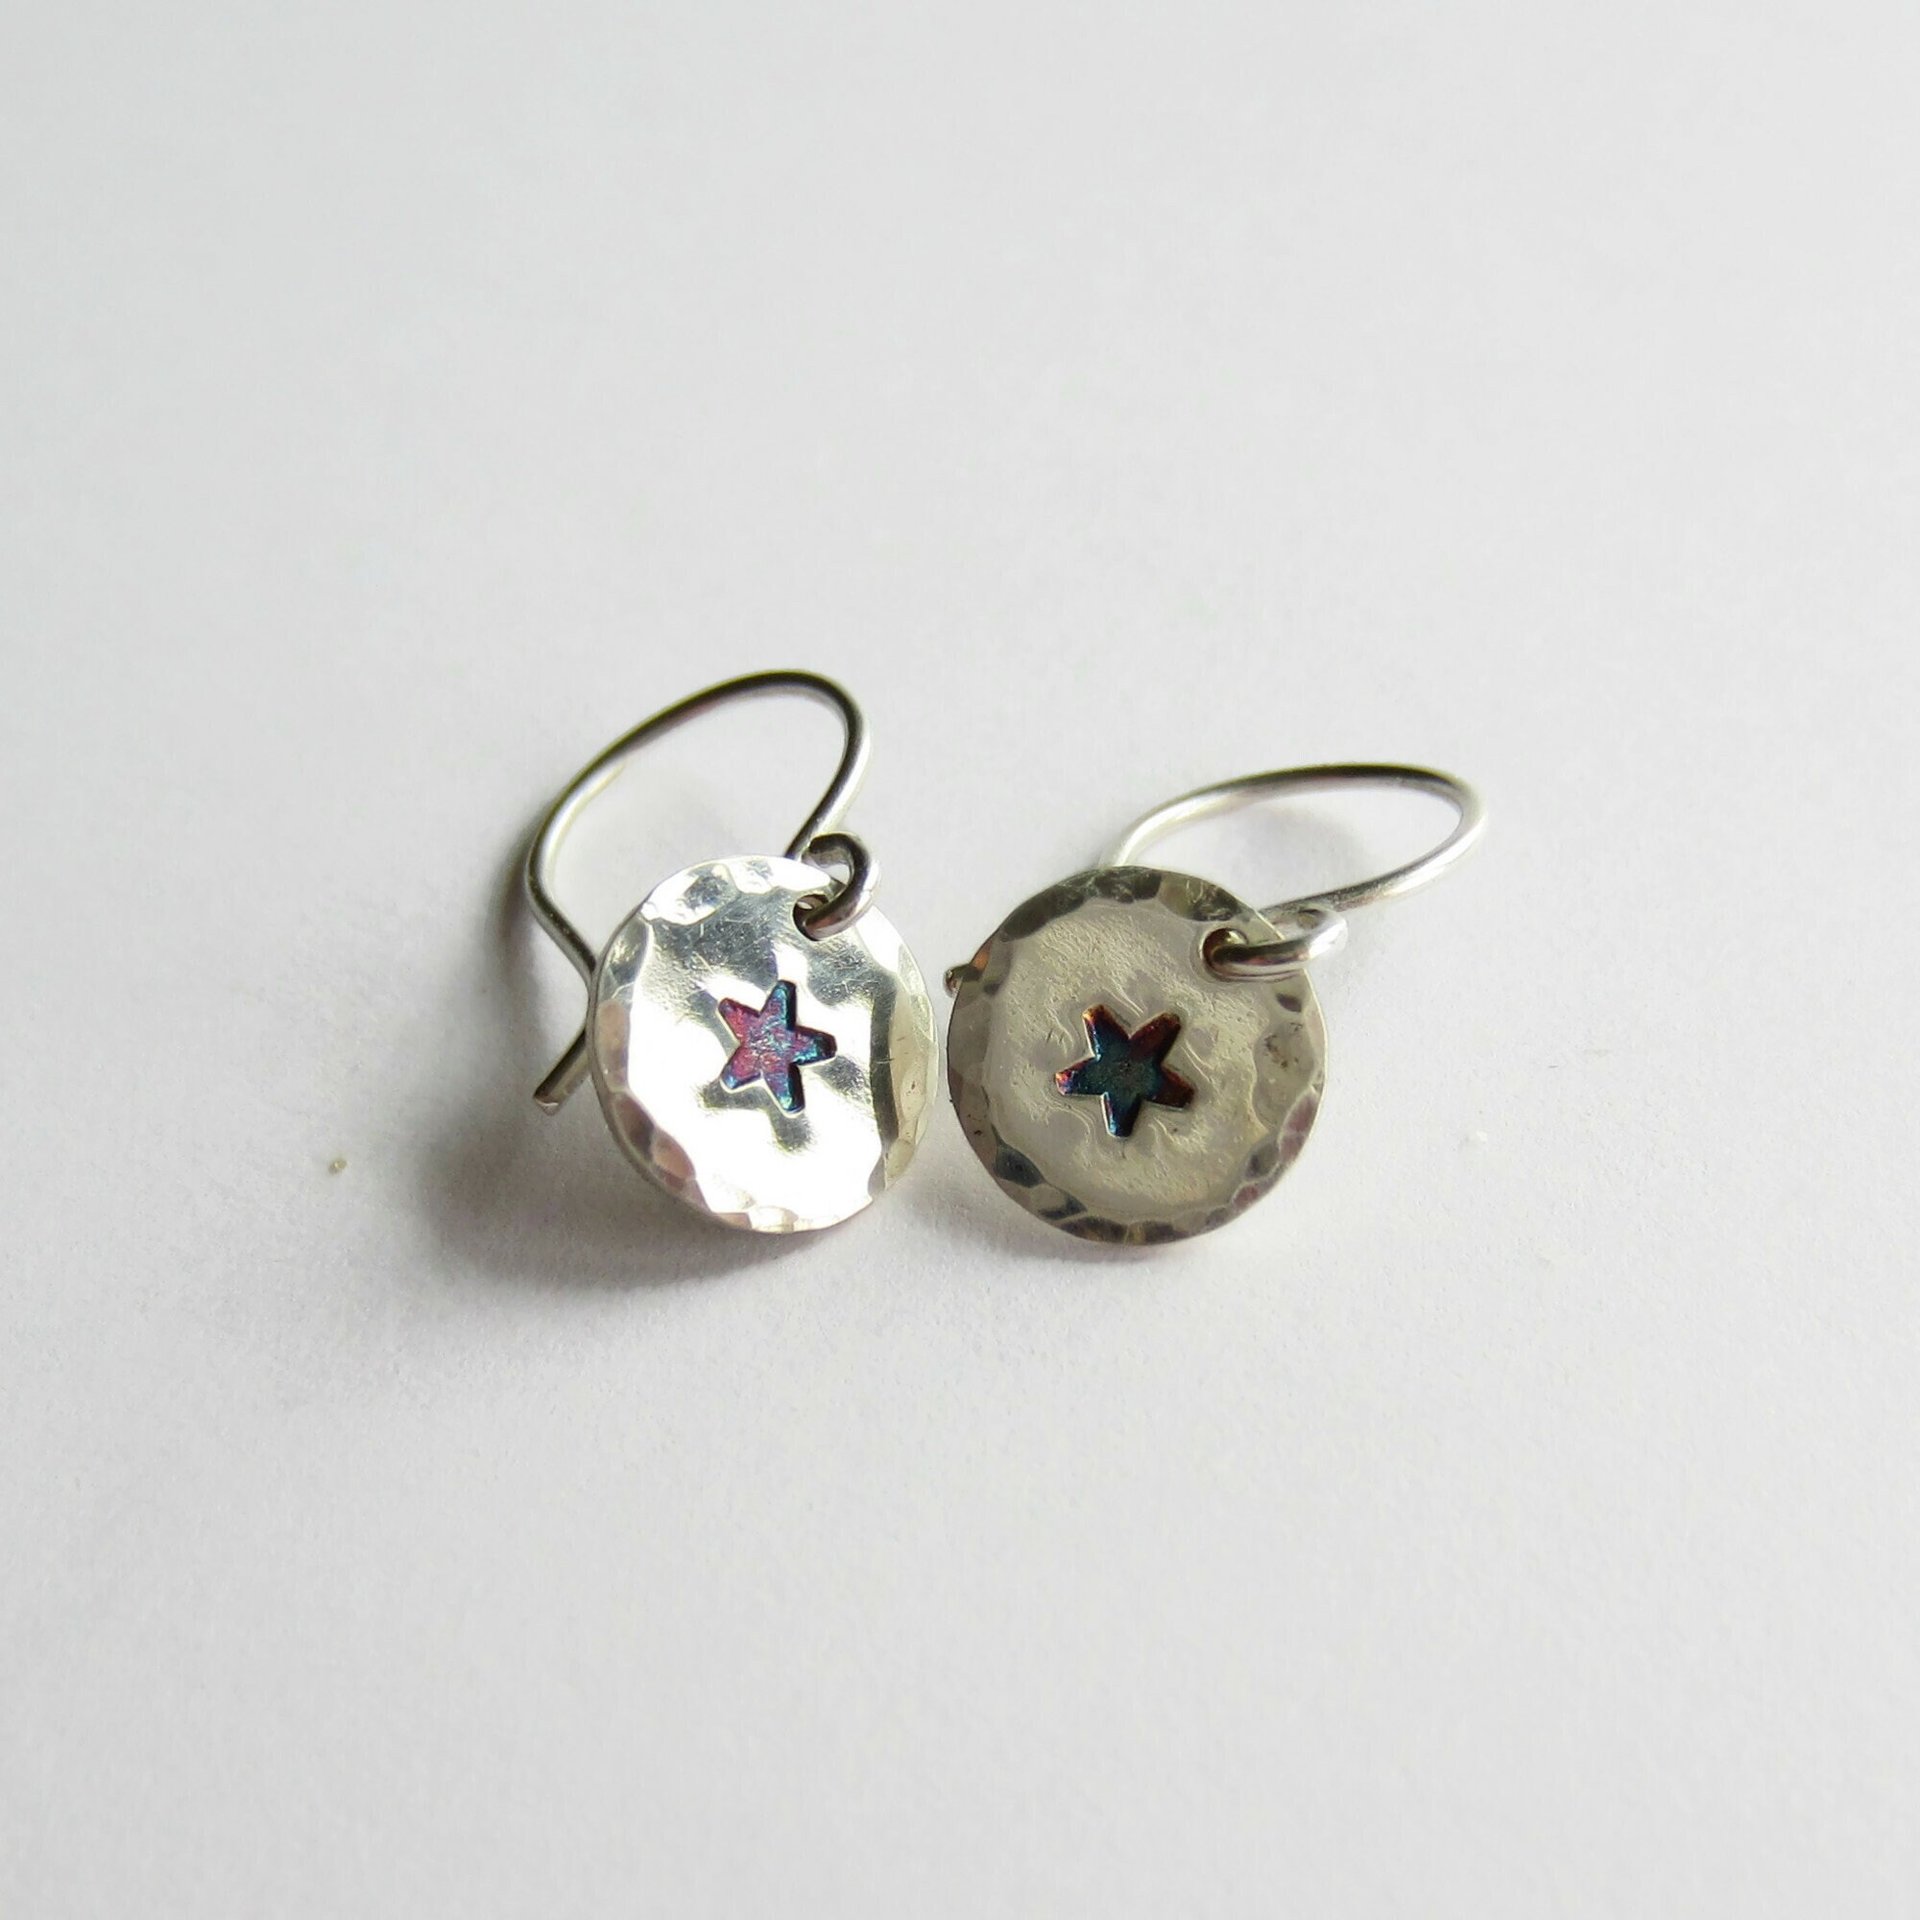 Hand Stamped Star Drop Earrings ~ 925 Sterling Silver ~ Handmade by The Tiny Tree Frog Jewellery